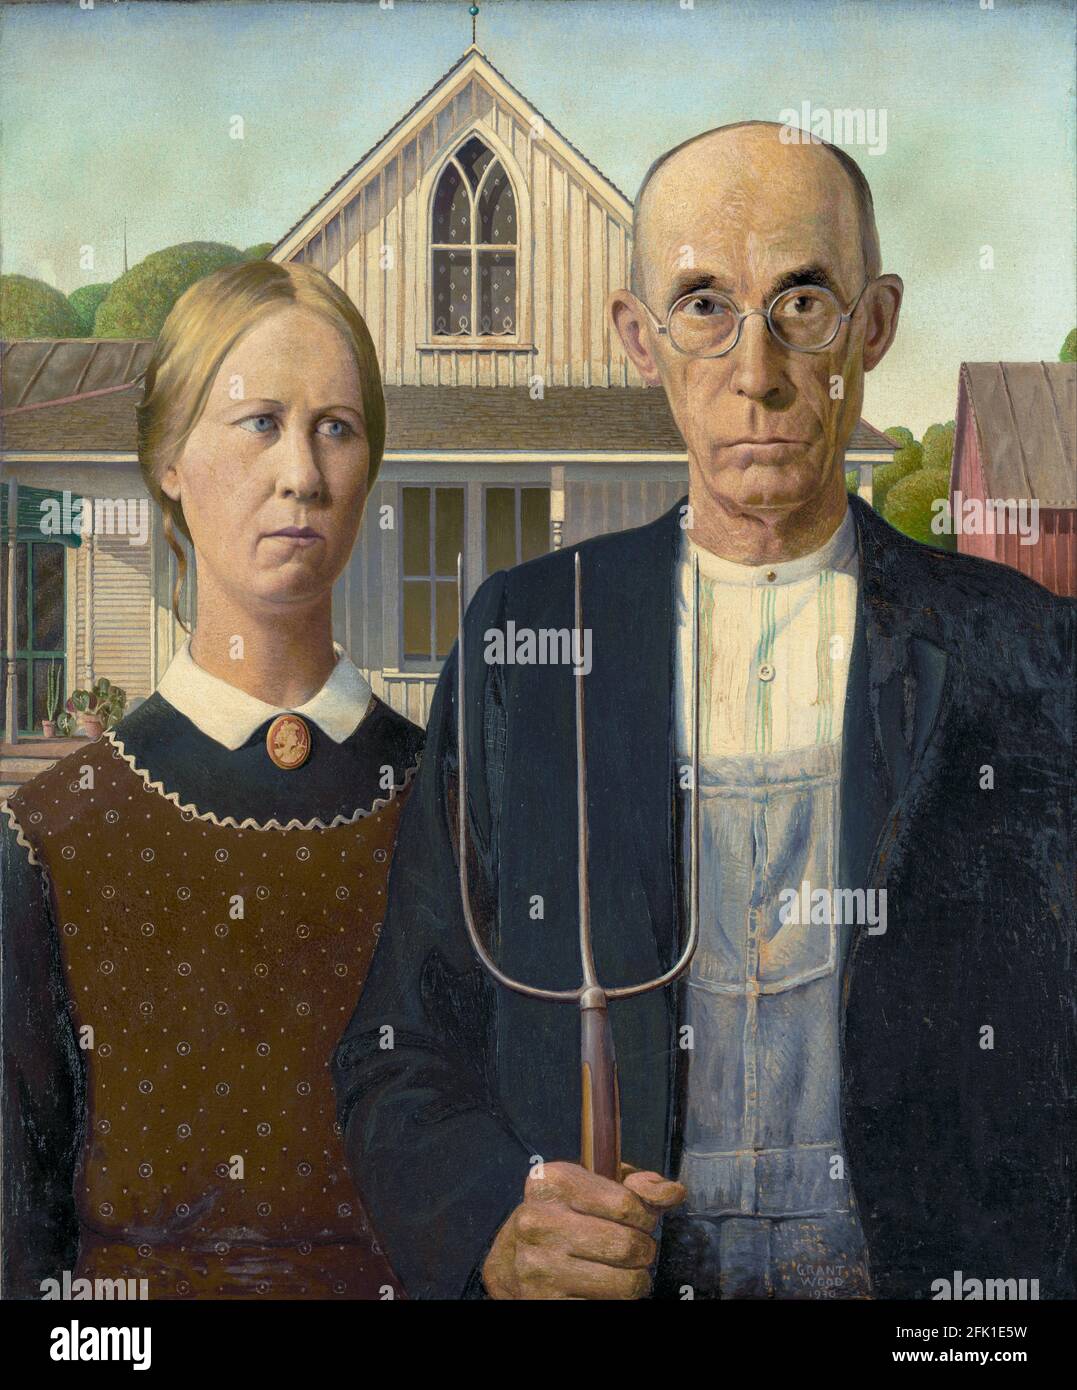 Grant Wood, American Gothic, 1930, Oil on Panel, Art Institute of Chicago Foto Stock